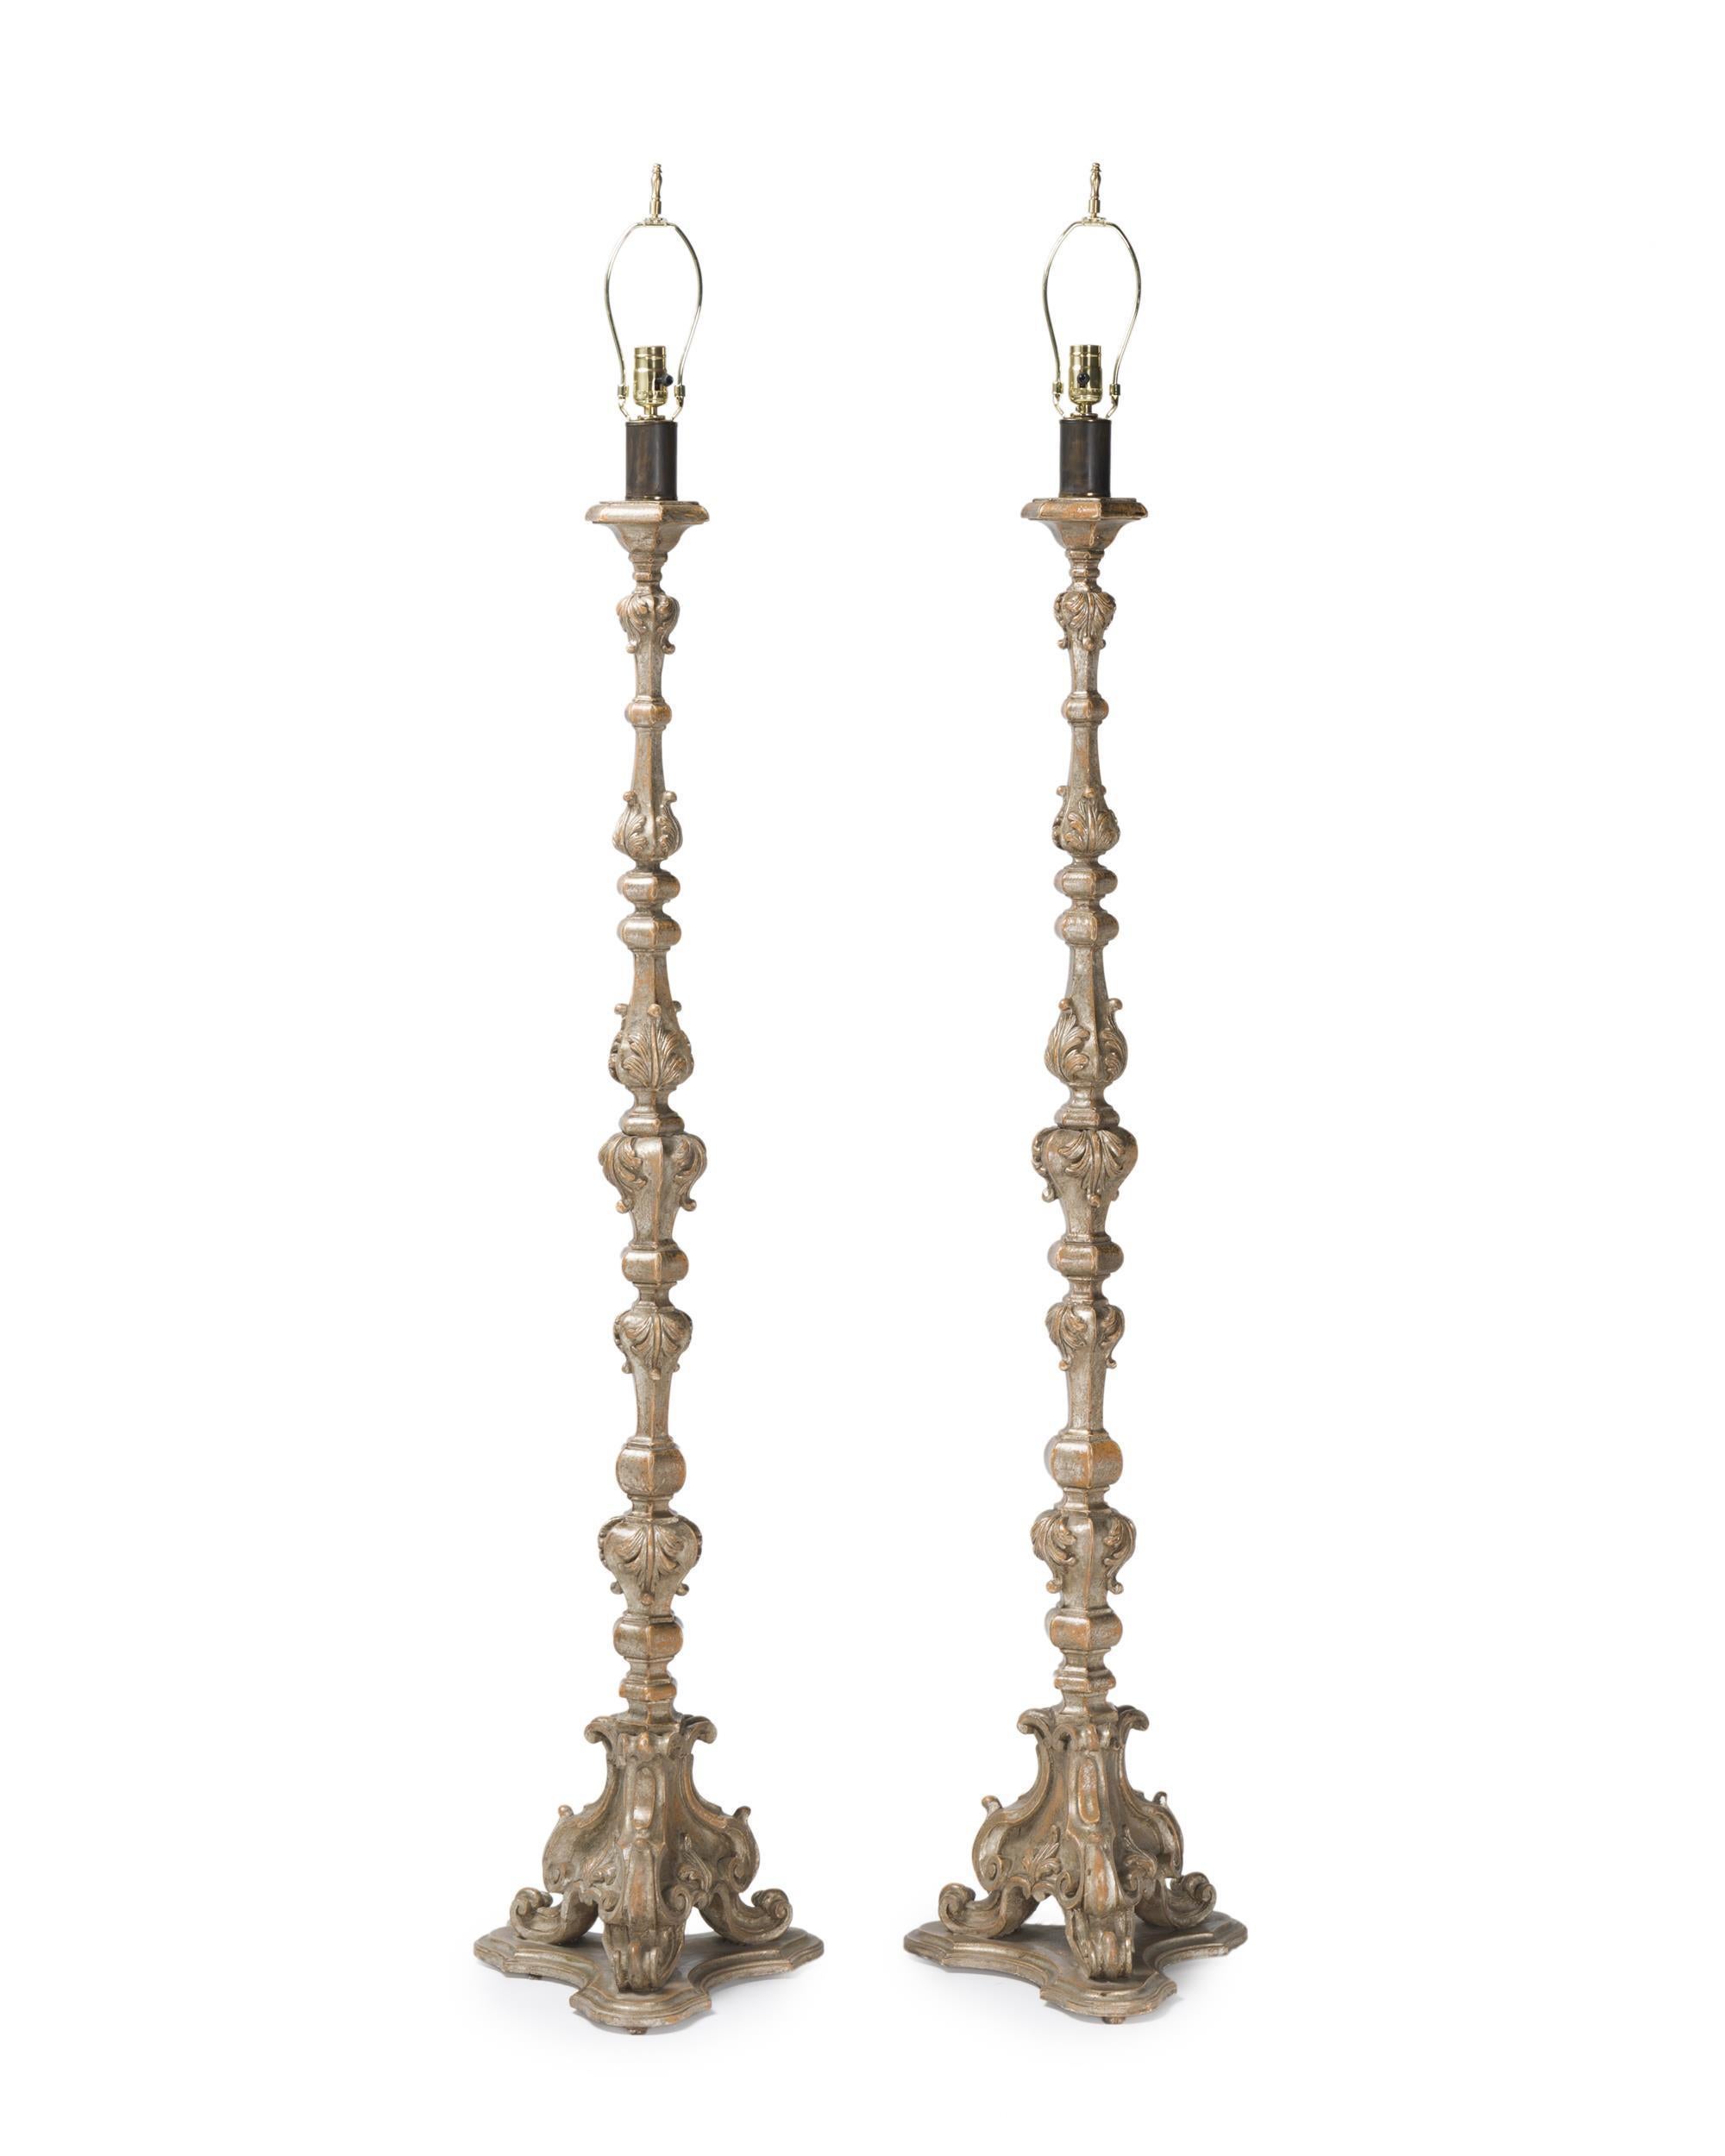 Neoclassical Pair of carved silver Leafed wood torchières floor lamps